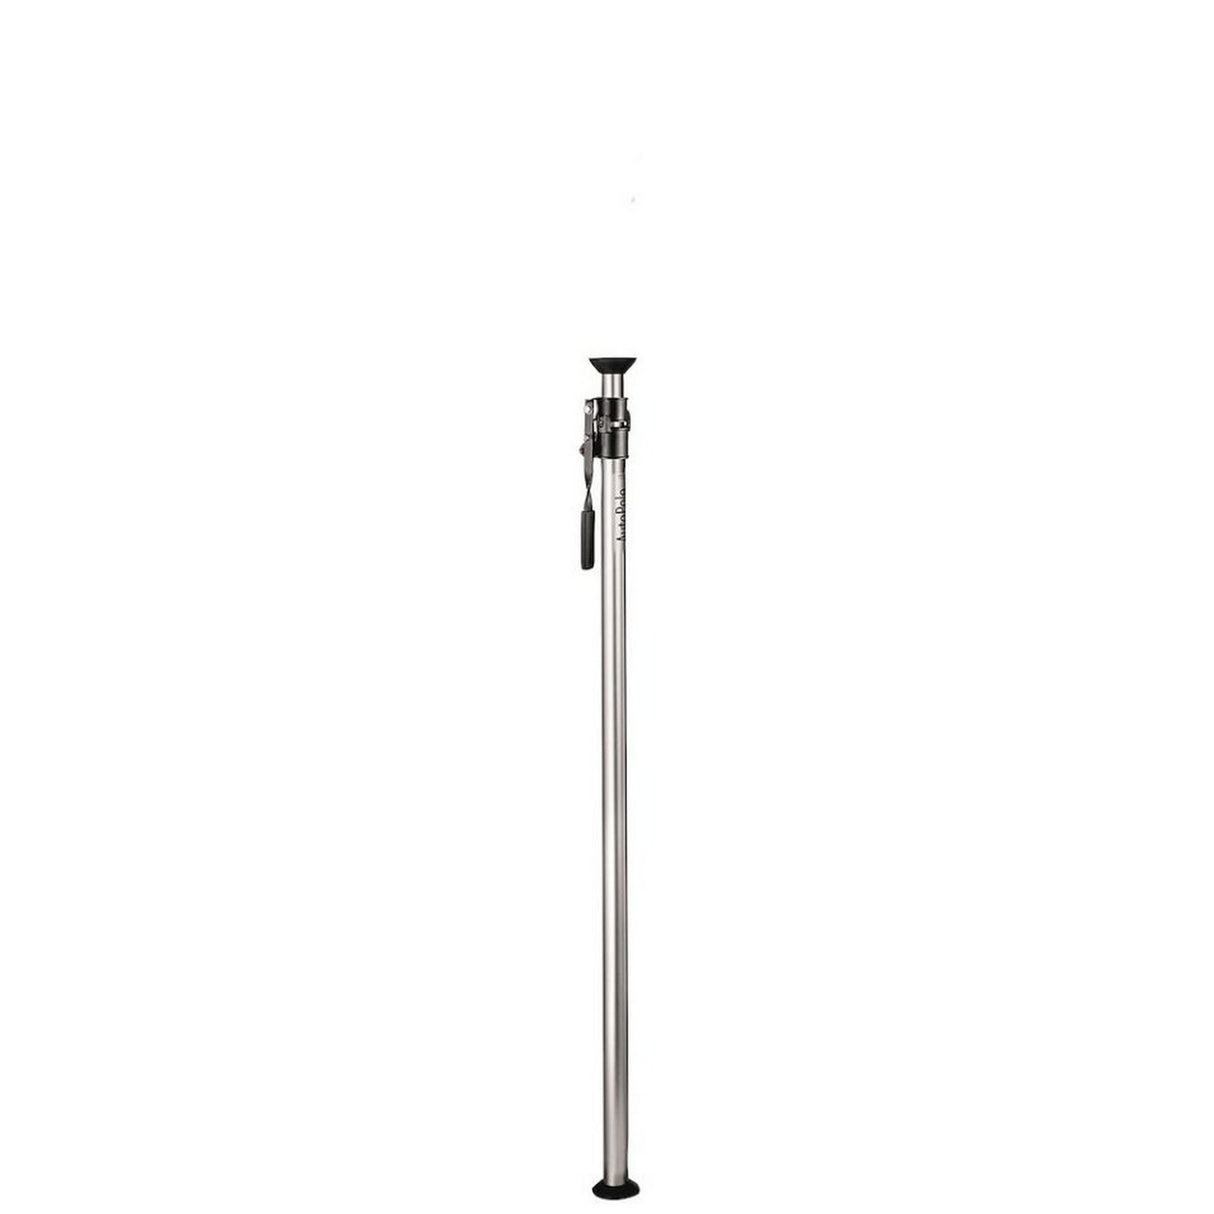 Manfrotto 076 Autopole, Extends from 59-106 Inches